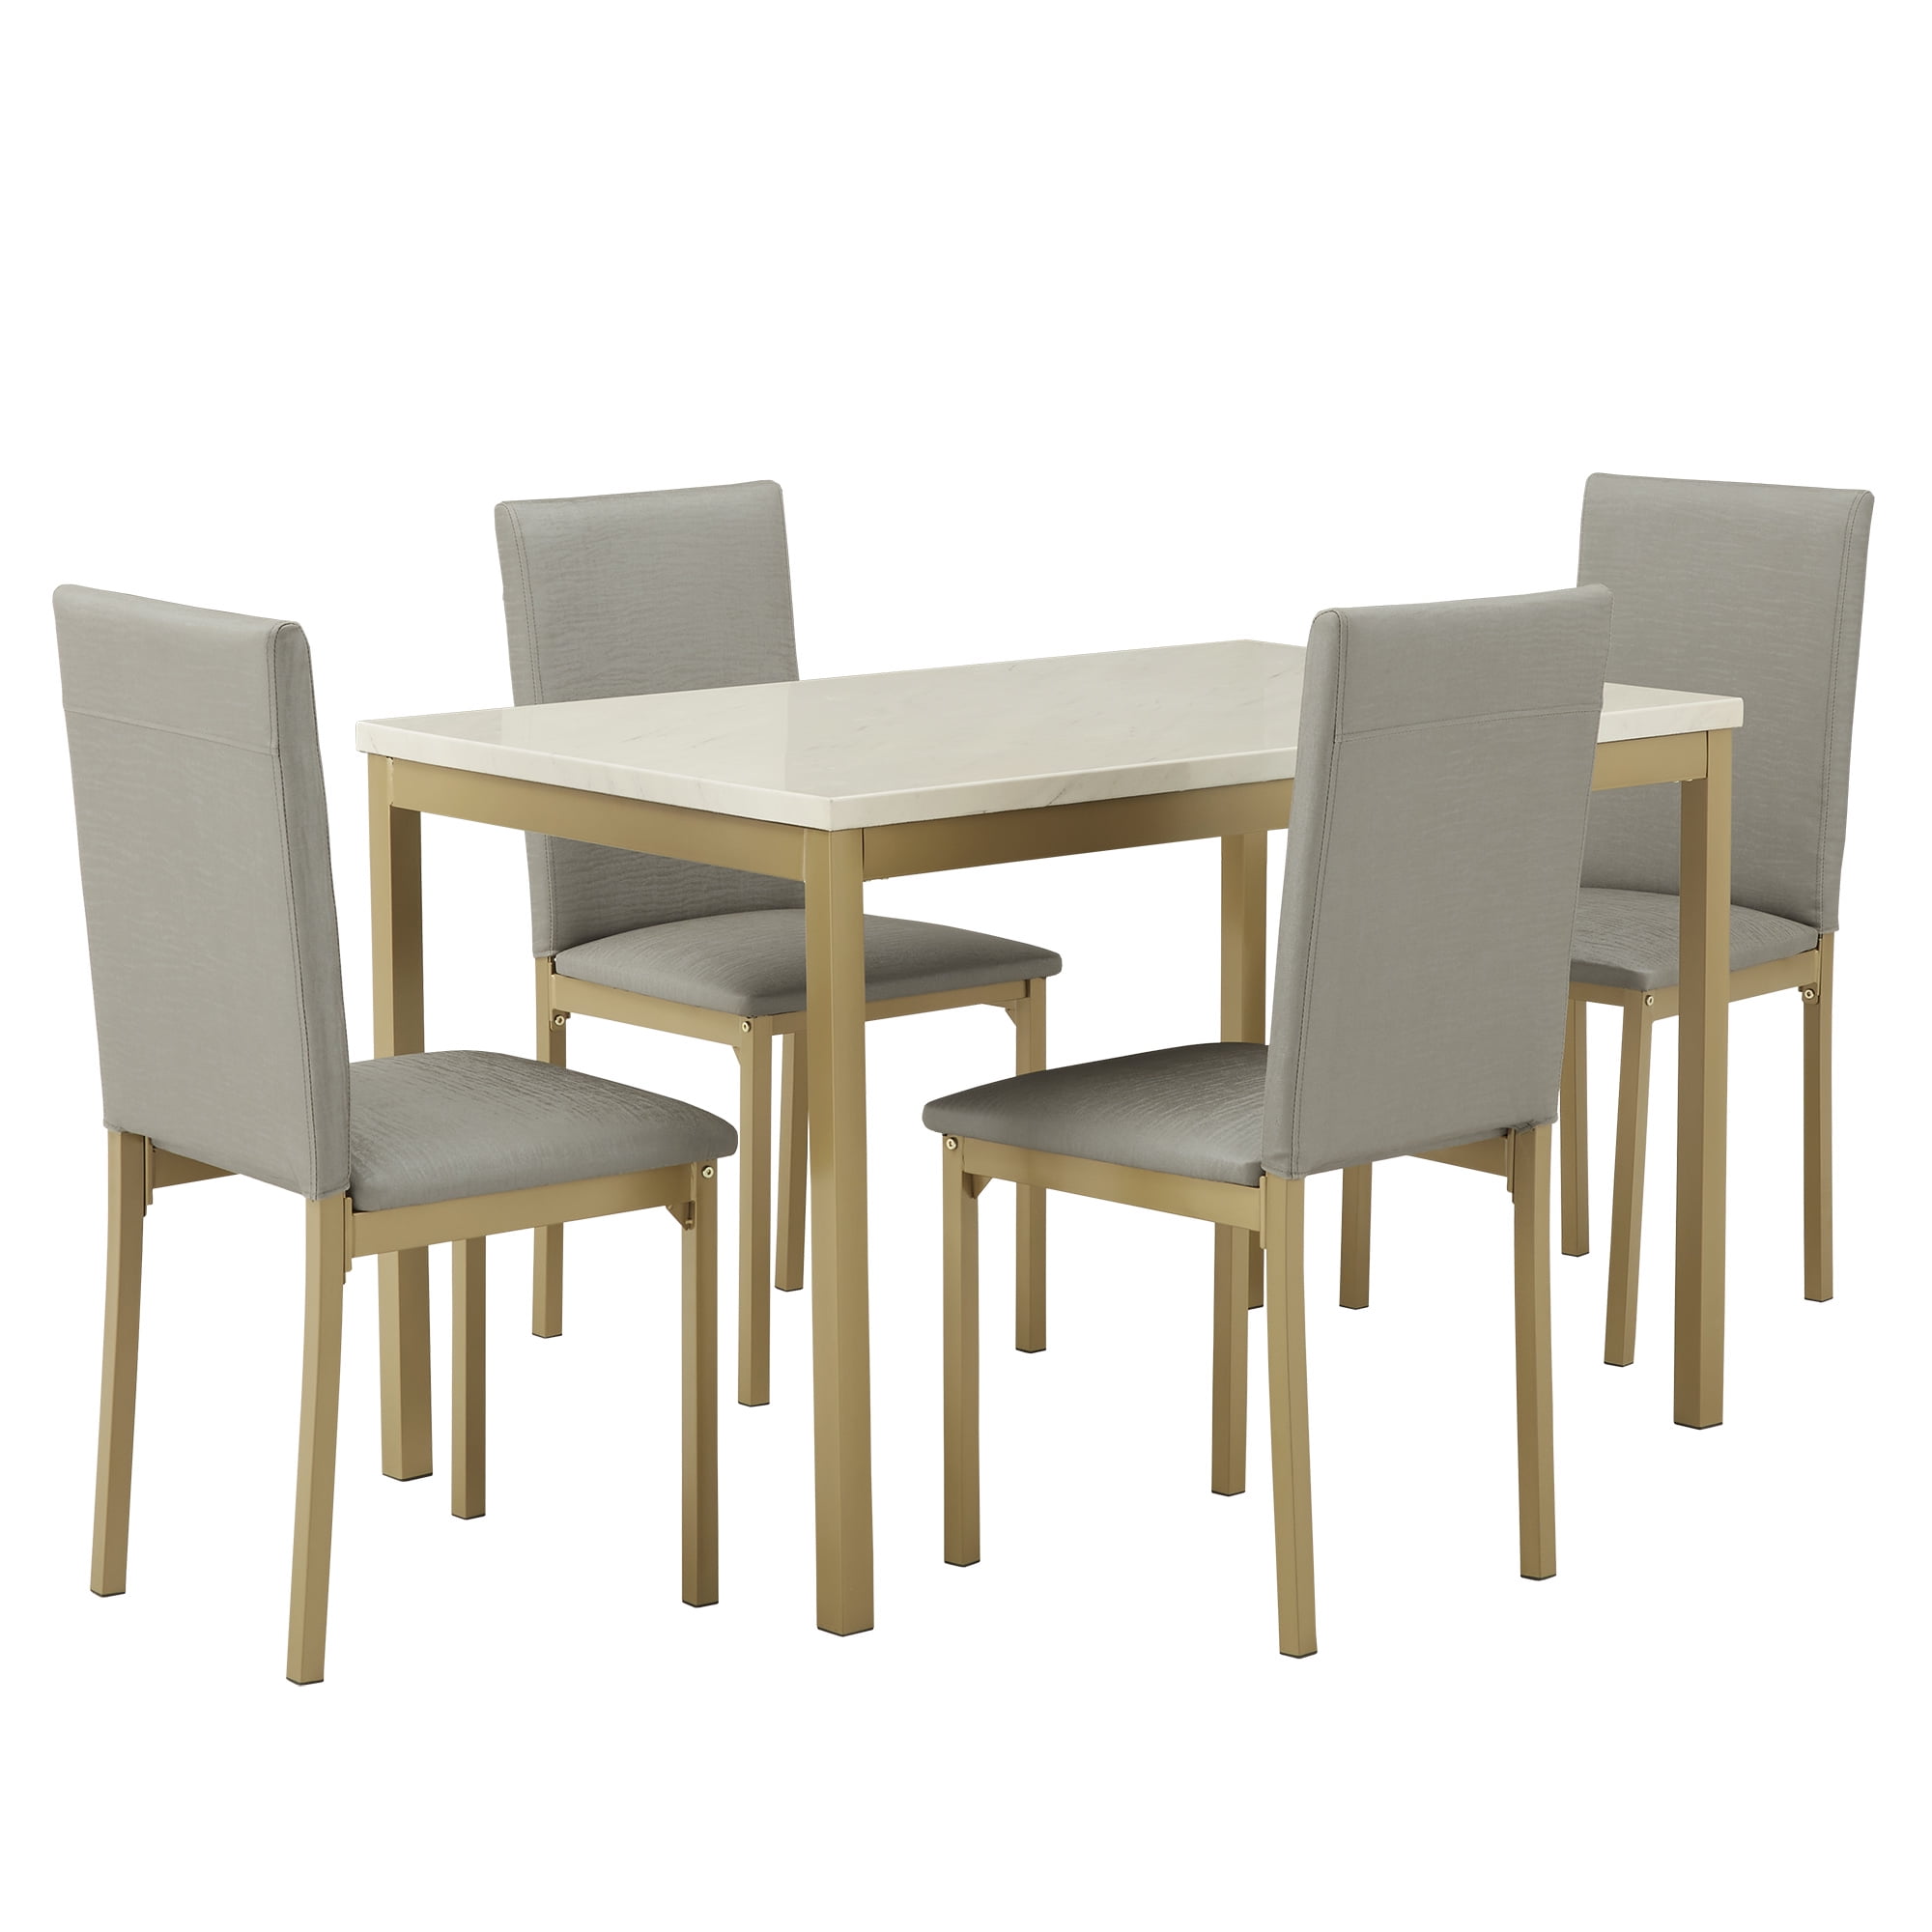 Weston Home Declan 5 Piece Faux Marble, Gold Metal Dining Table And Chairs